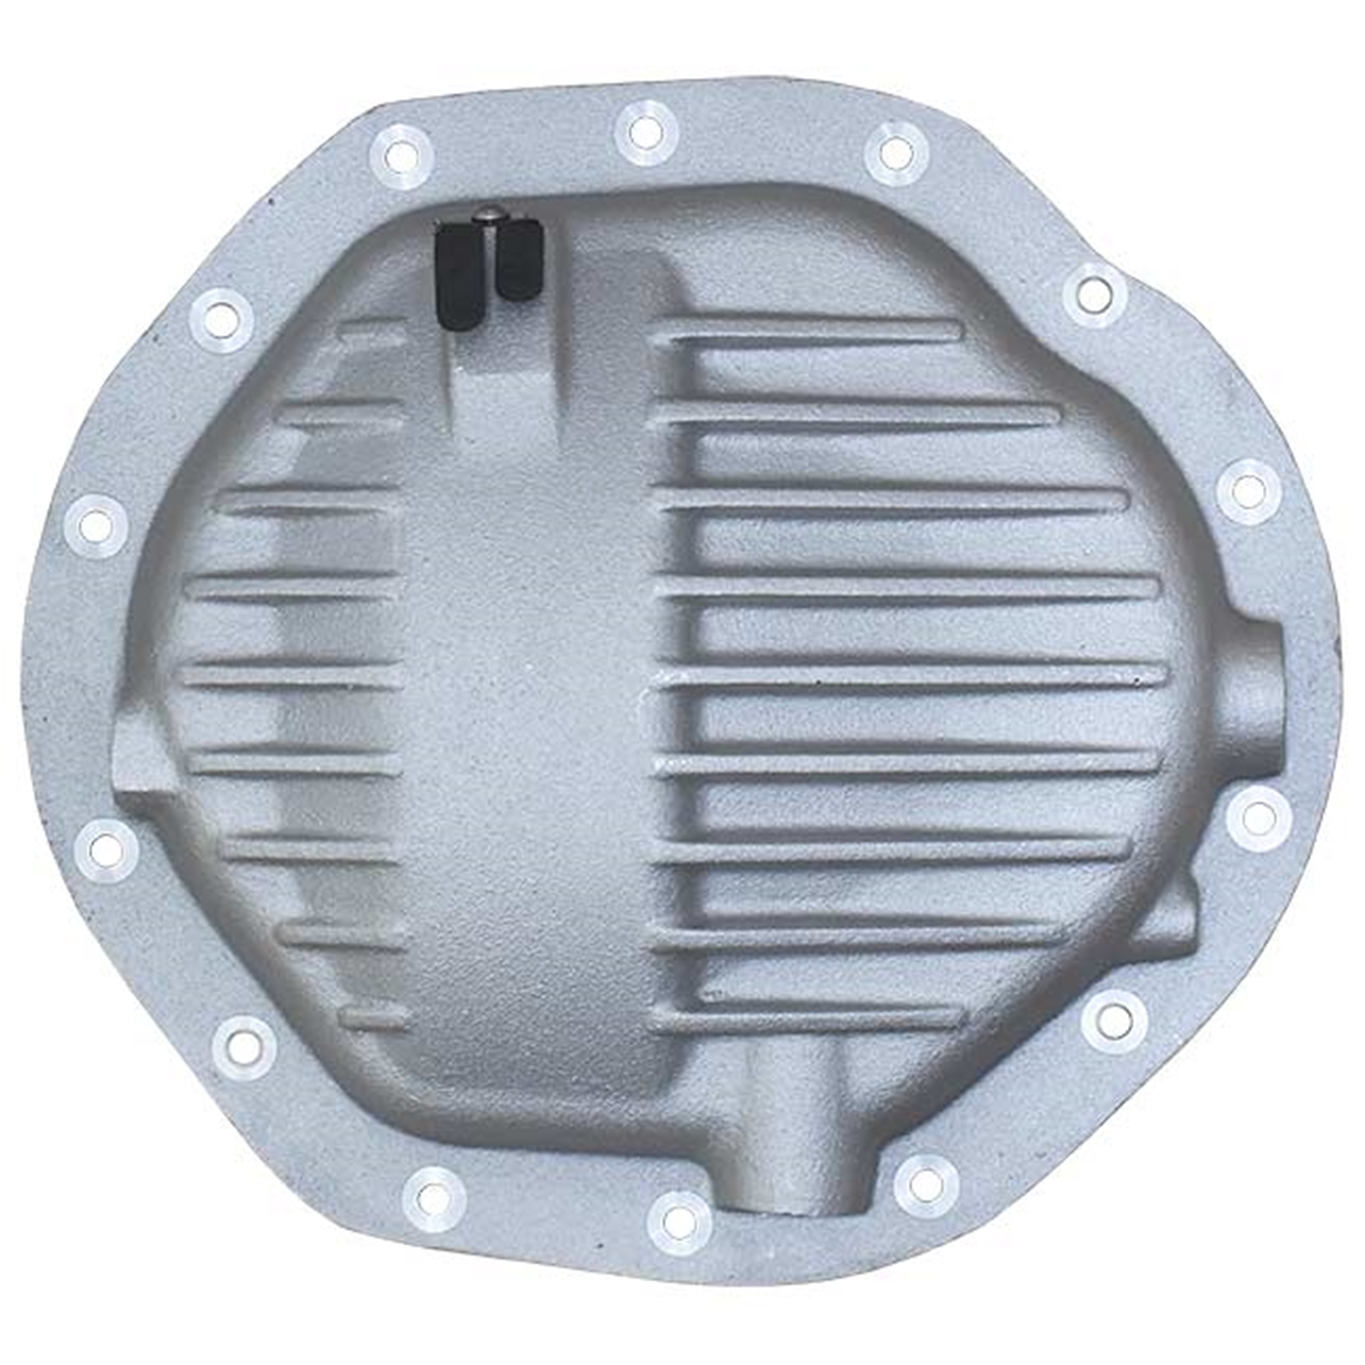 AAM for Nissan Titan Rear 14 Bolt Differential Cover